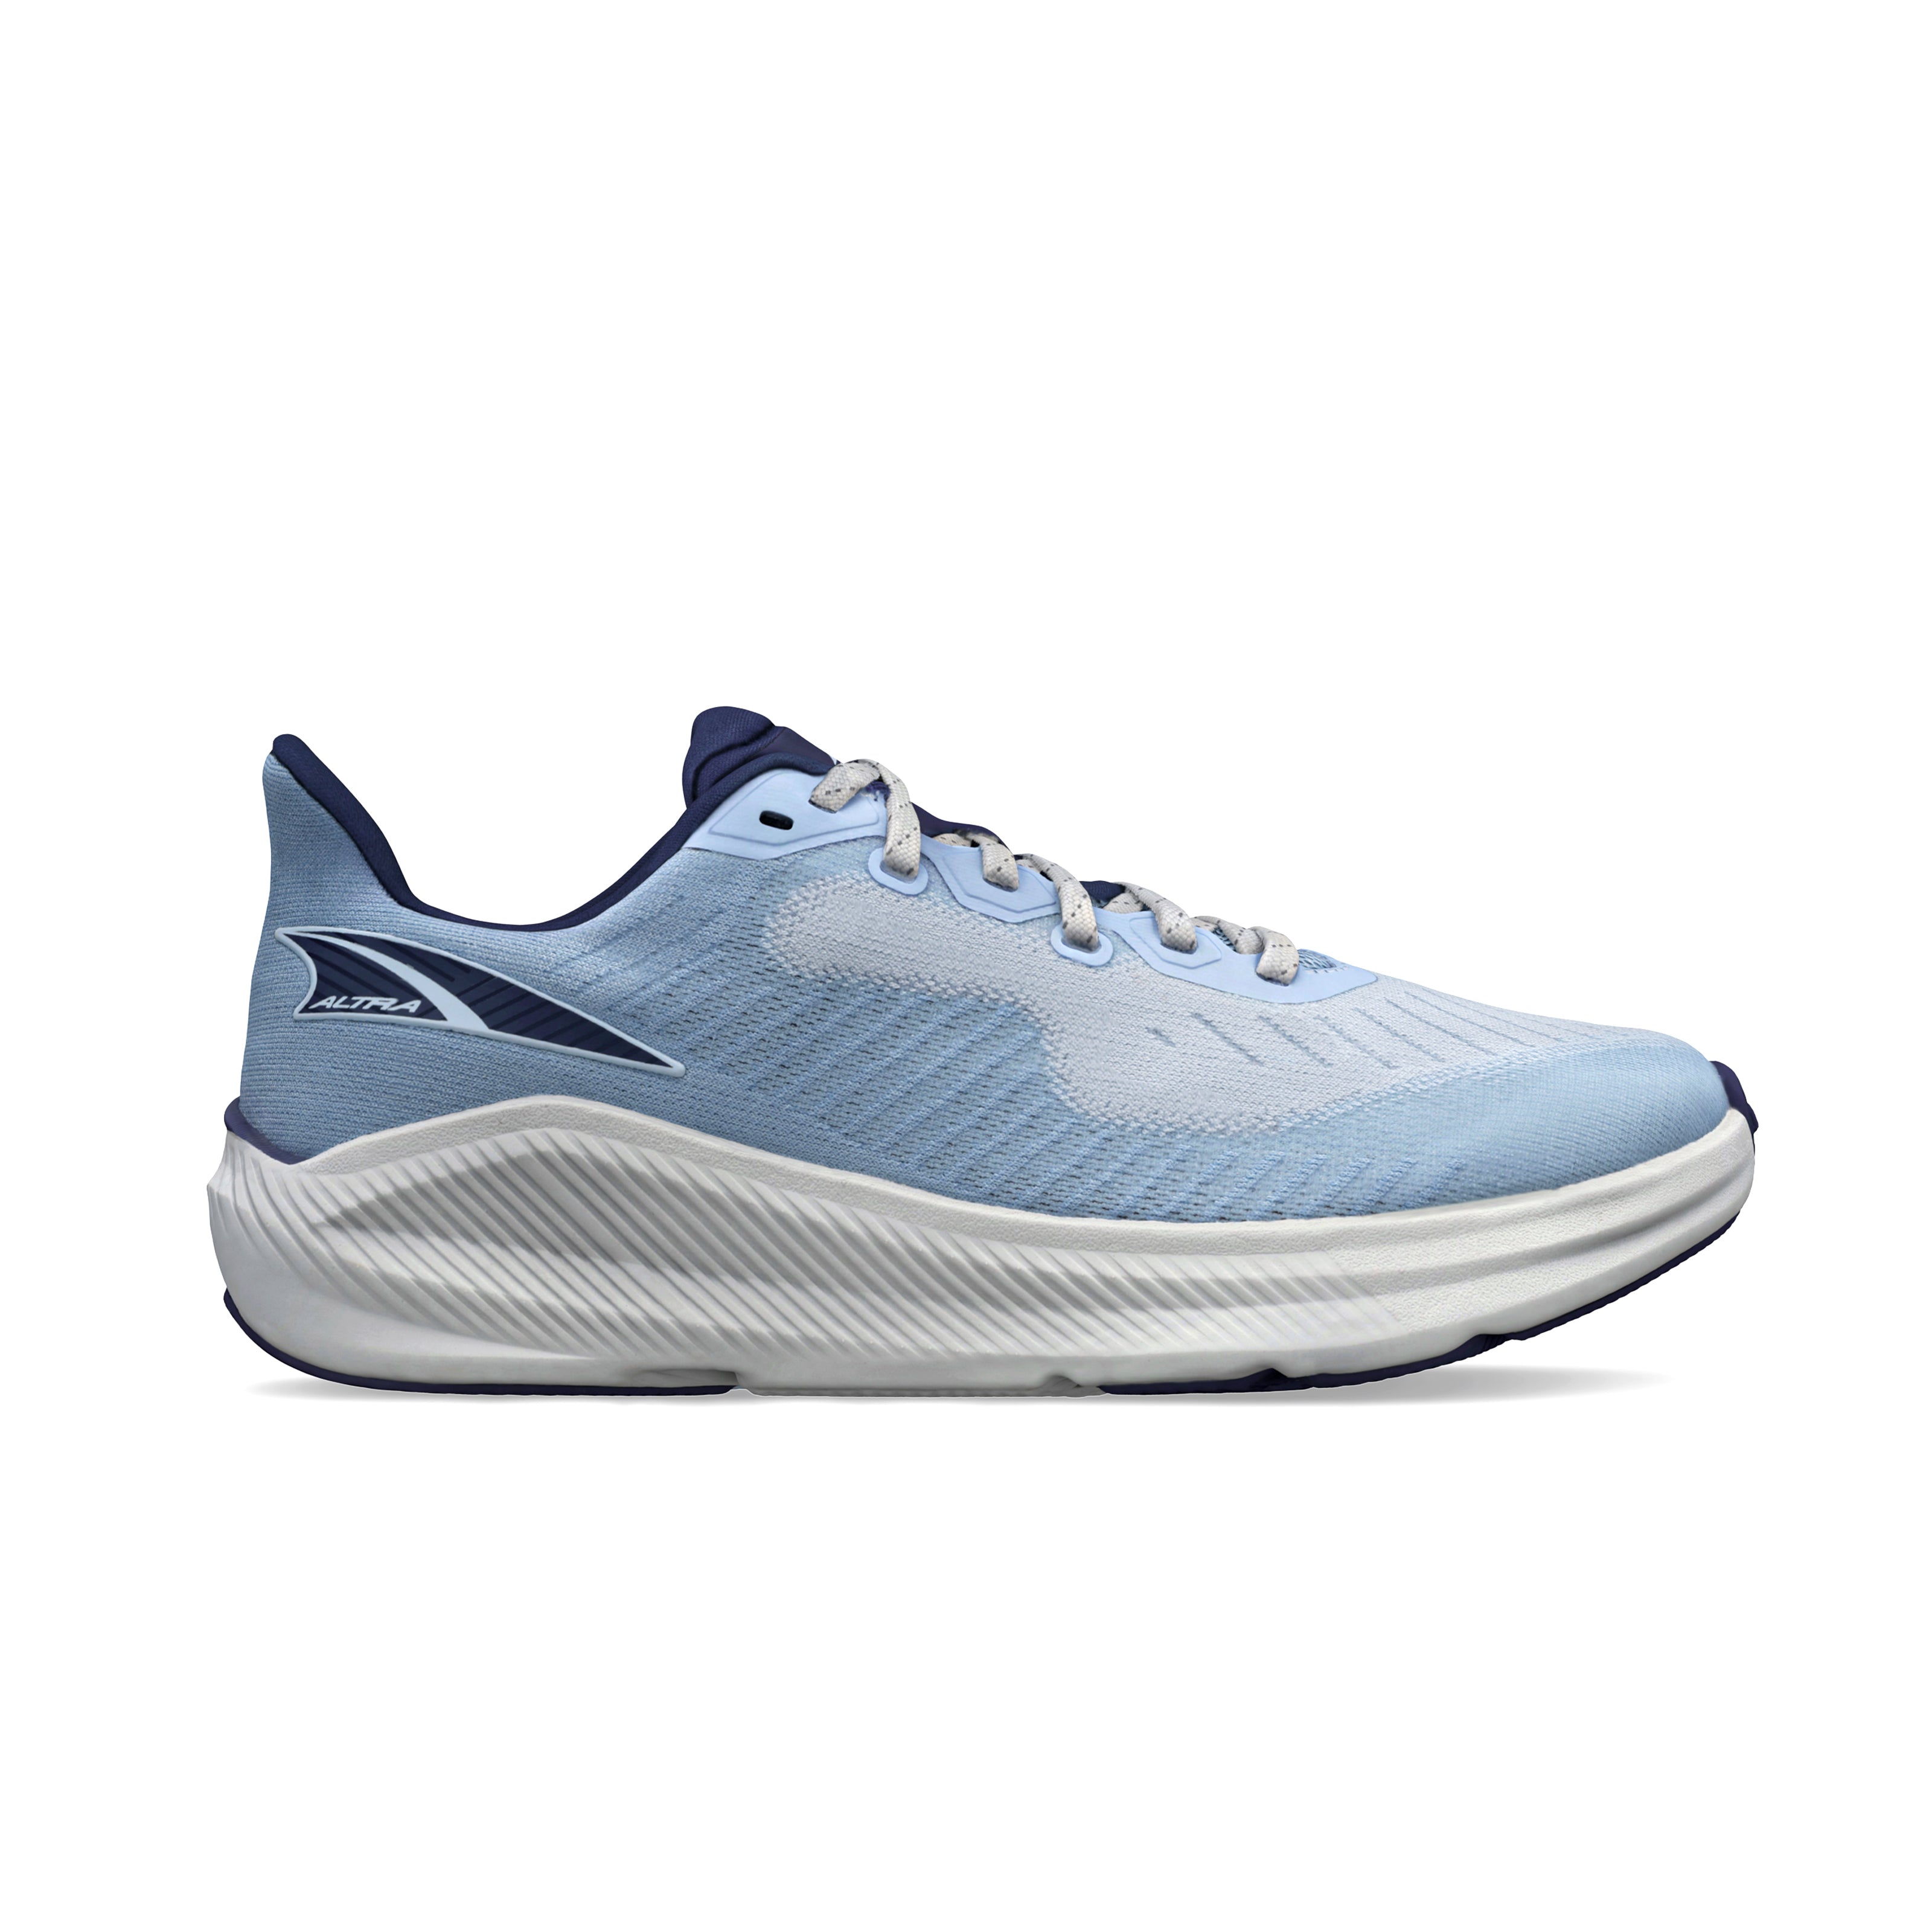 ALTRA WOMEN'S EXPERIENCE FORM - B - 420 BLUE/GRAY 5.5